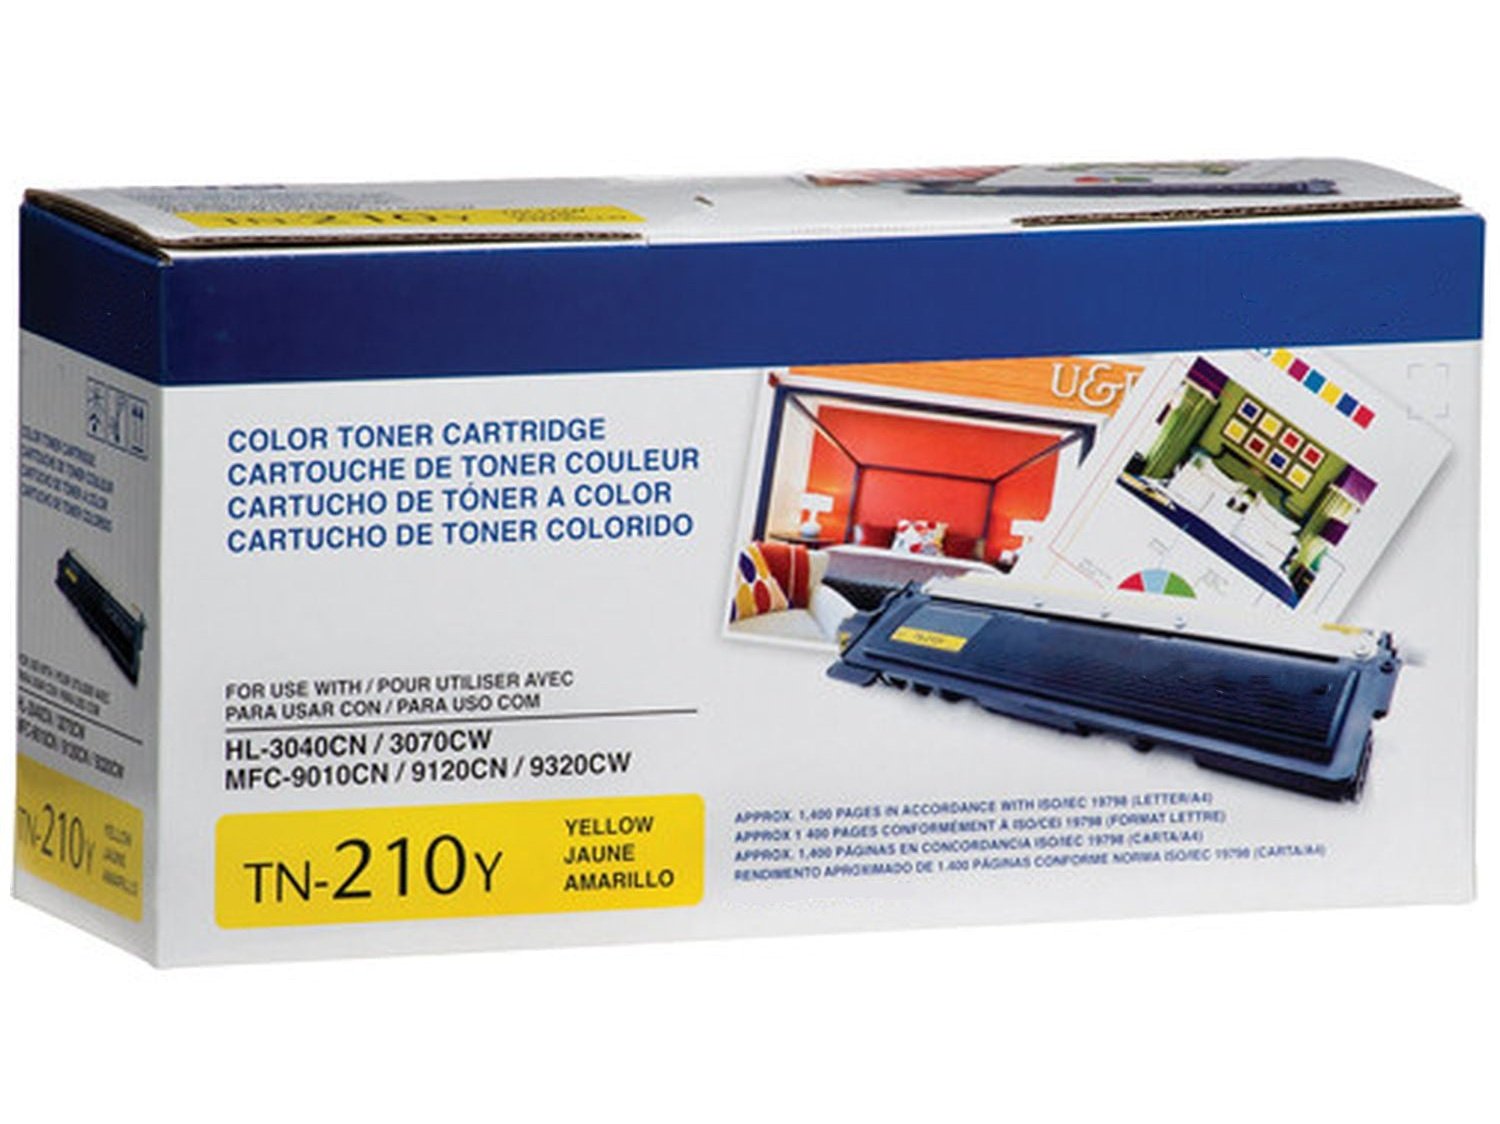 ICU Compatible/ OEM Get Brother ICU-TN-210-Y Yields 1400 Pages TN-210 Yellow Standard Yield 1400 Pages Toner Cartridge (TN210Y) - Ink Cartridges USA